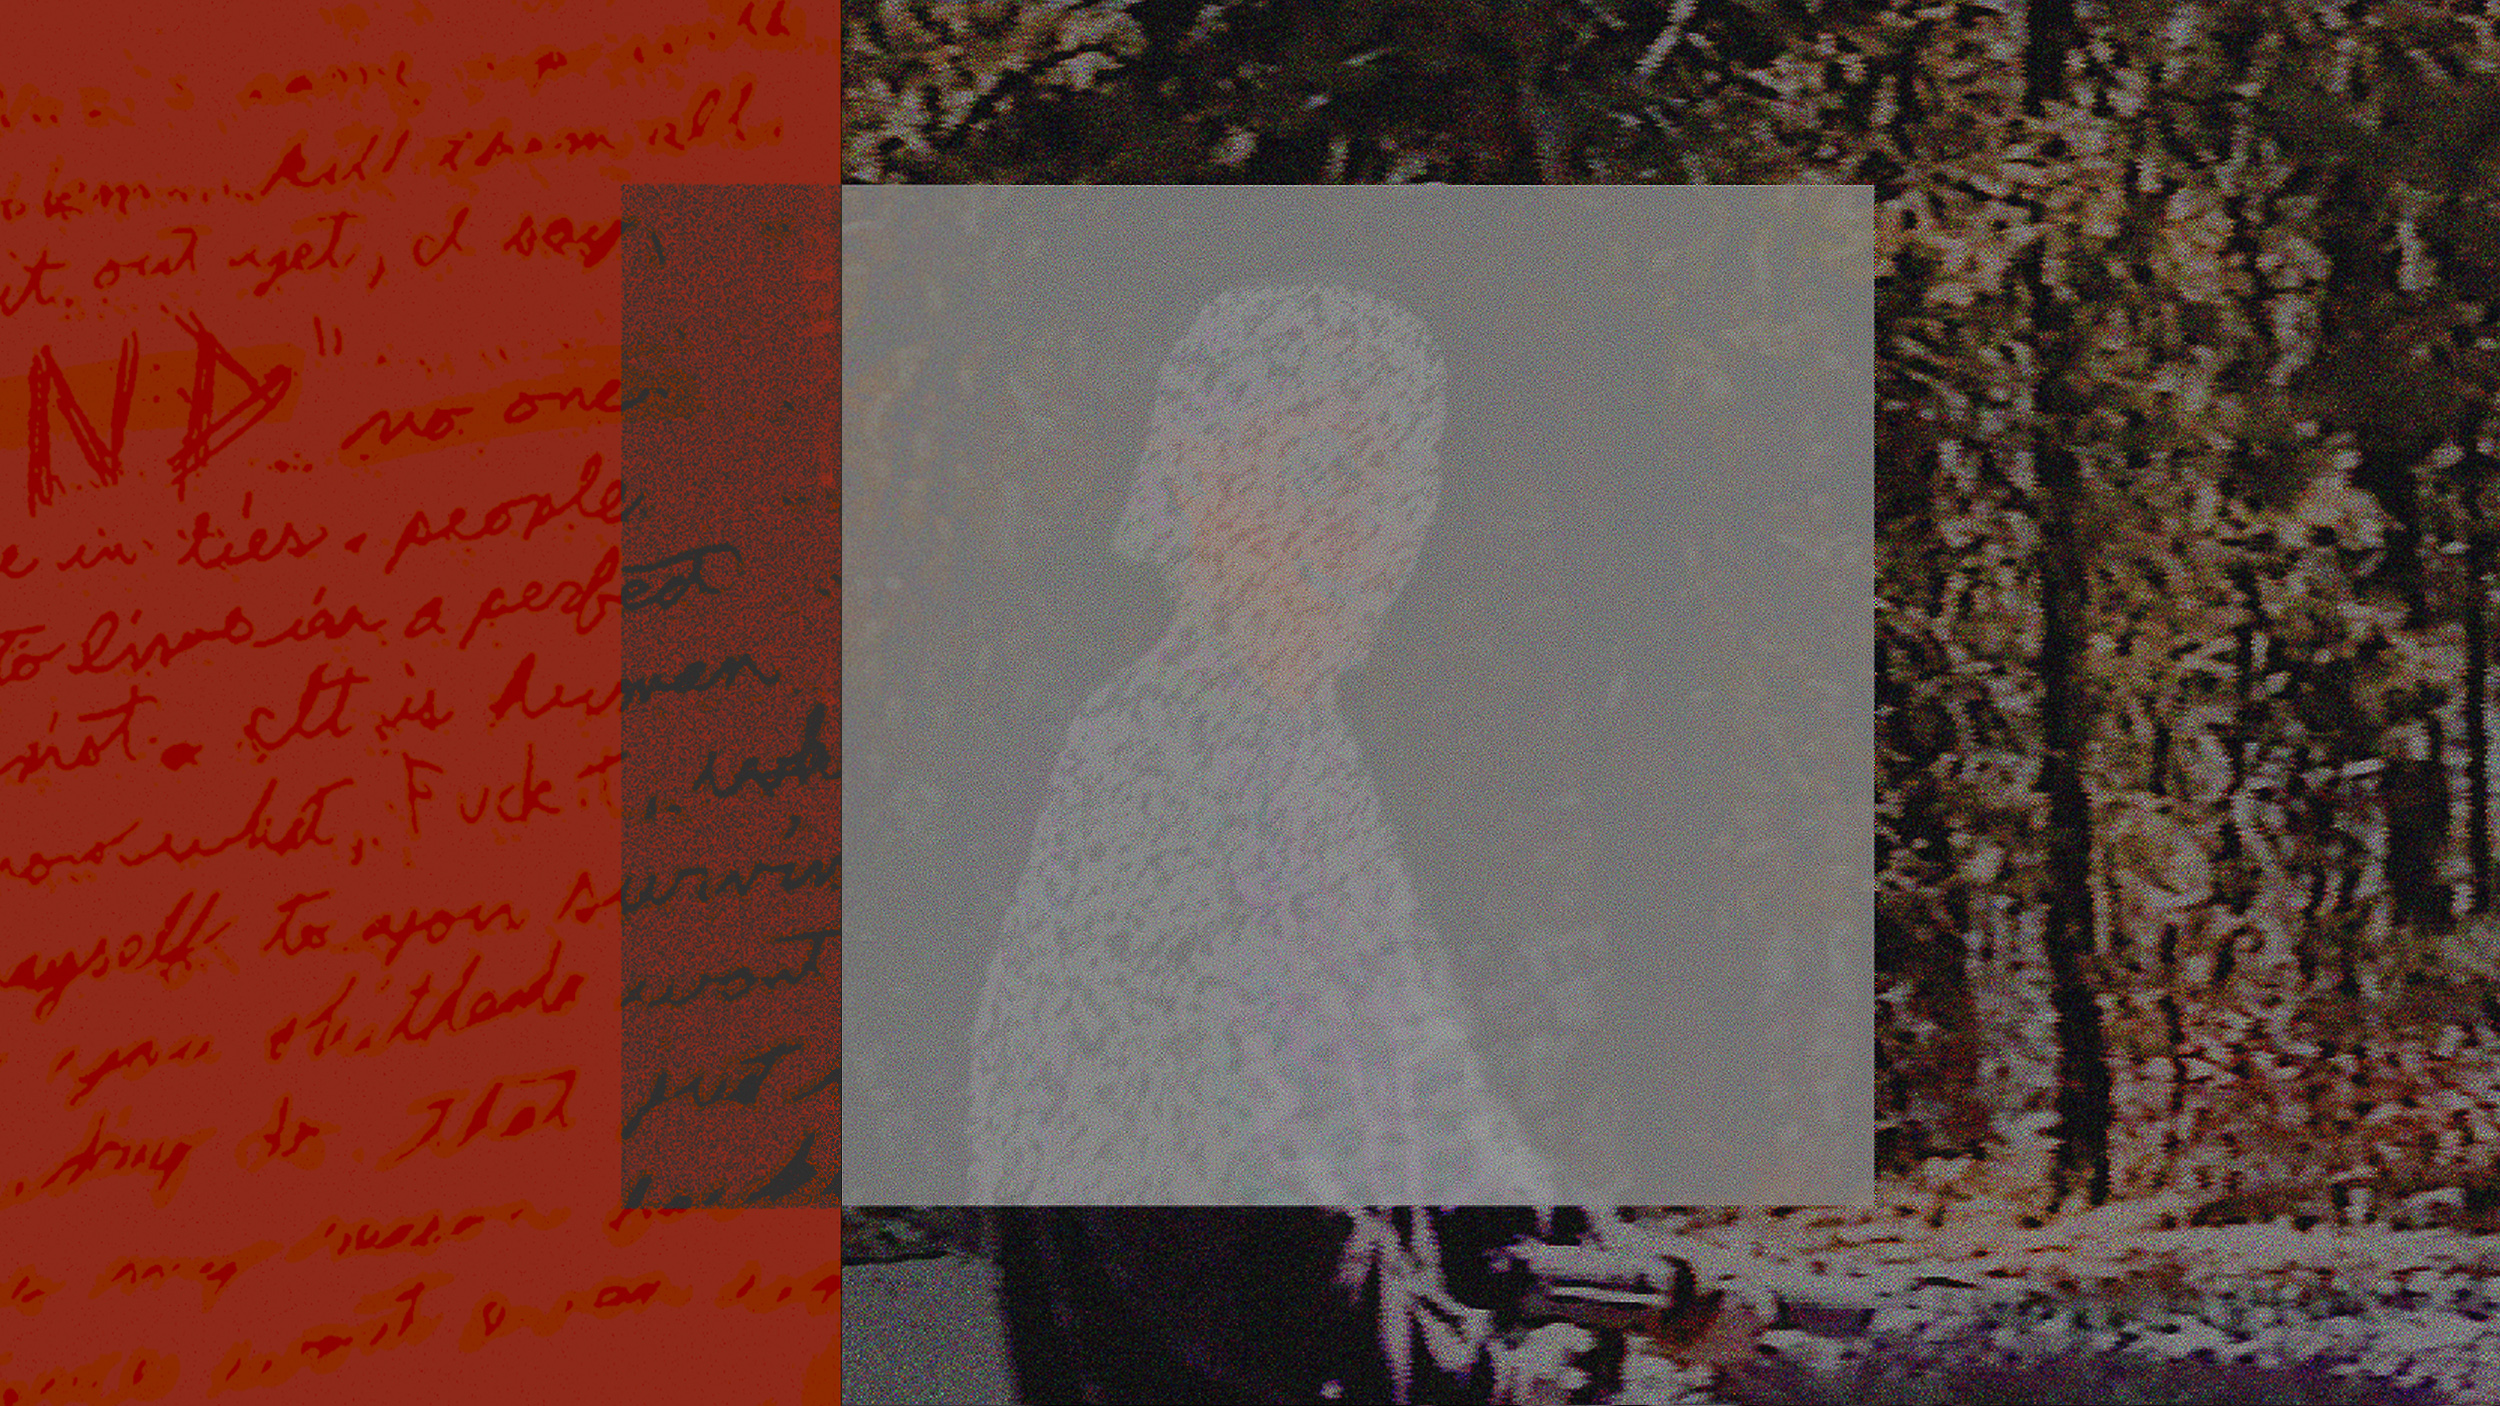 A pixelated image of a person in a white hoodie walking in the woods, with the person's face obscured by pixelation. The background features reddish handwritten text overlay.